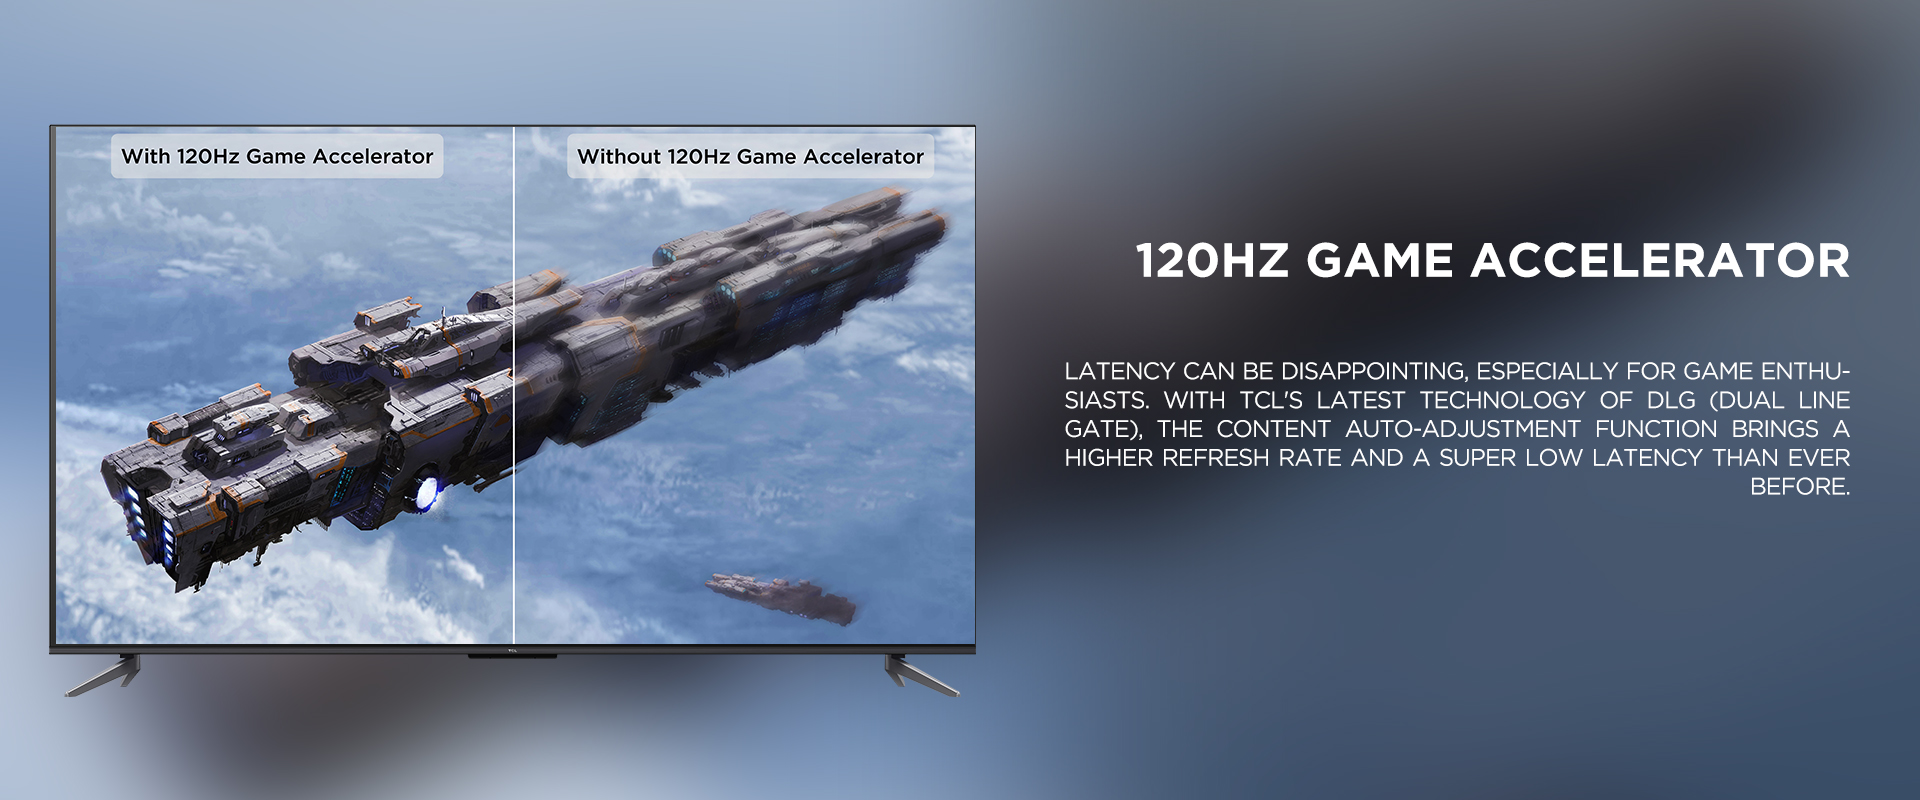 120Hz Game Accelerator - Latency can be disappointing, especially for game enthusiasts. With TCL's latest technology of DLG (Dual Line Gate), the content auto-adjustment function brings a higher refresh rate and a super low latency than ever before. 